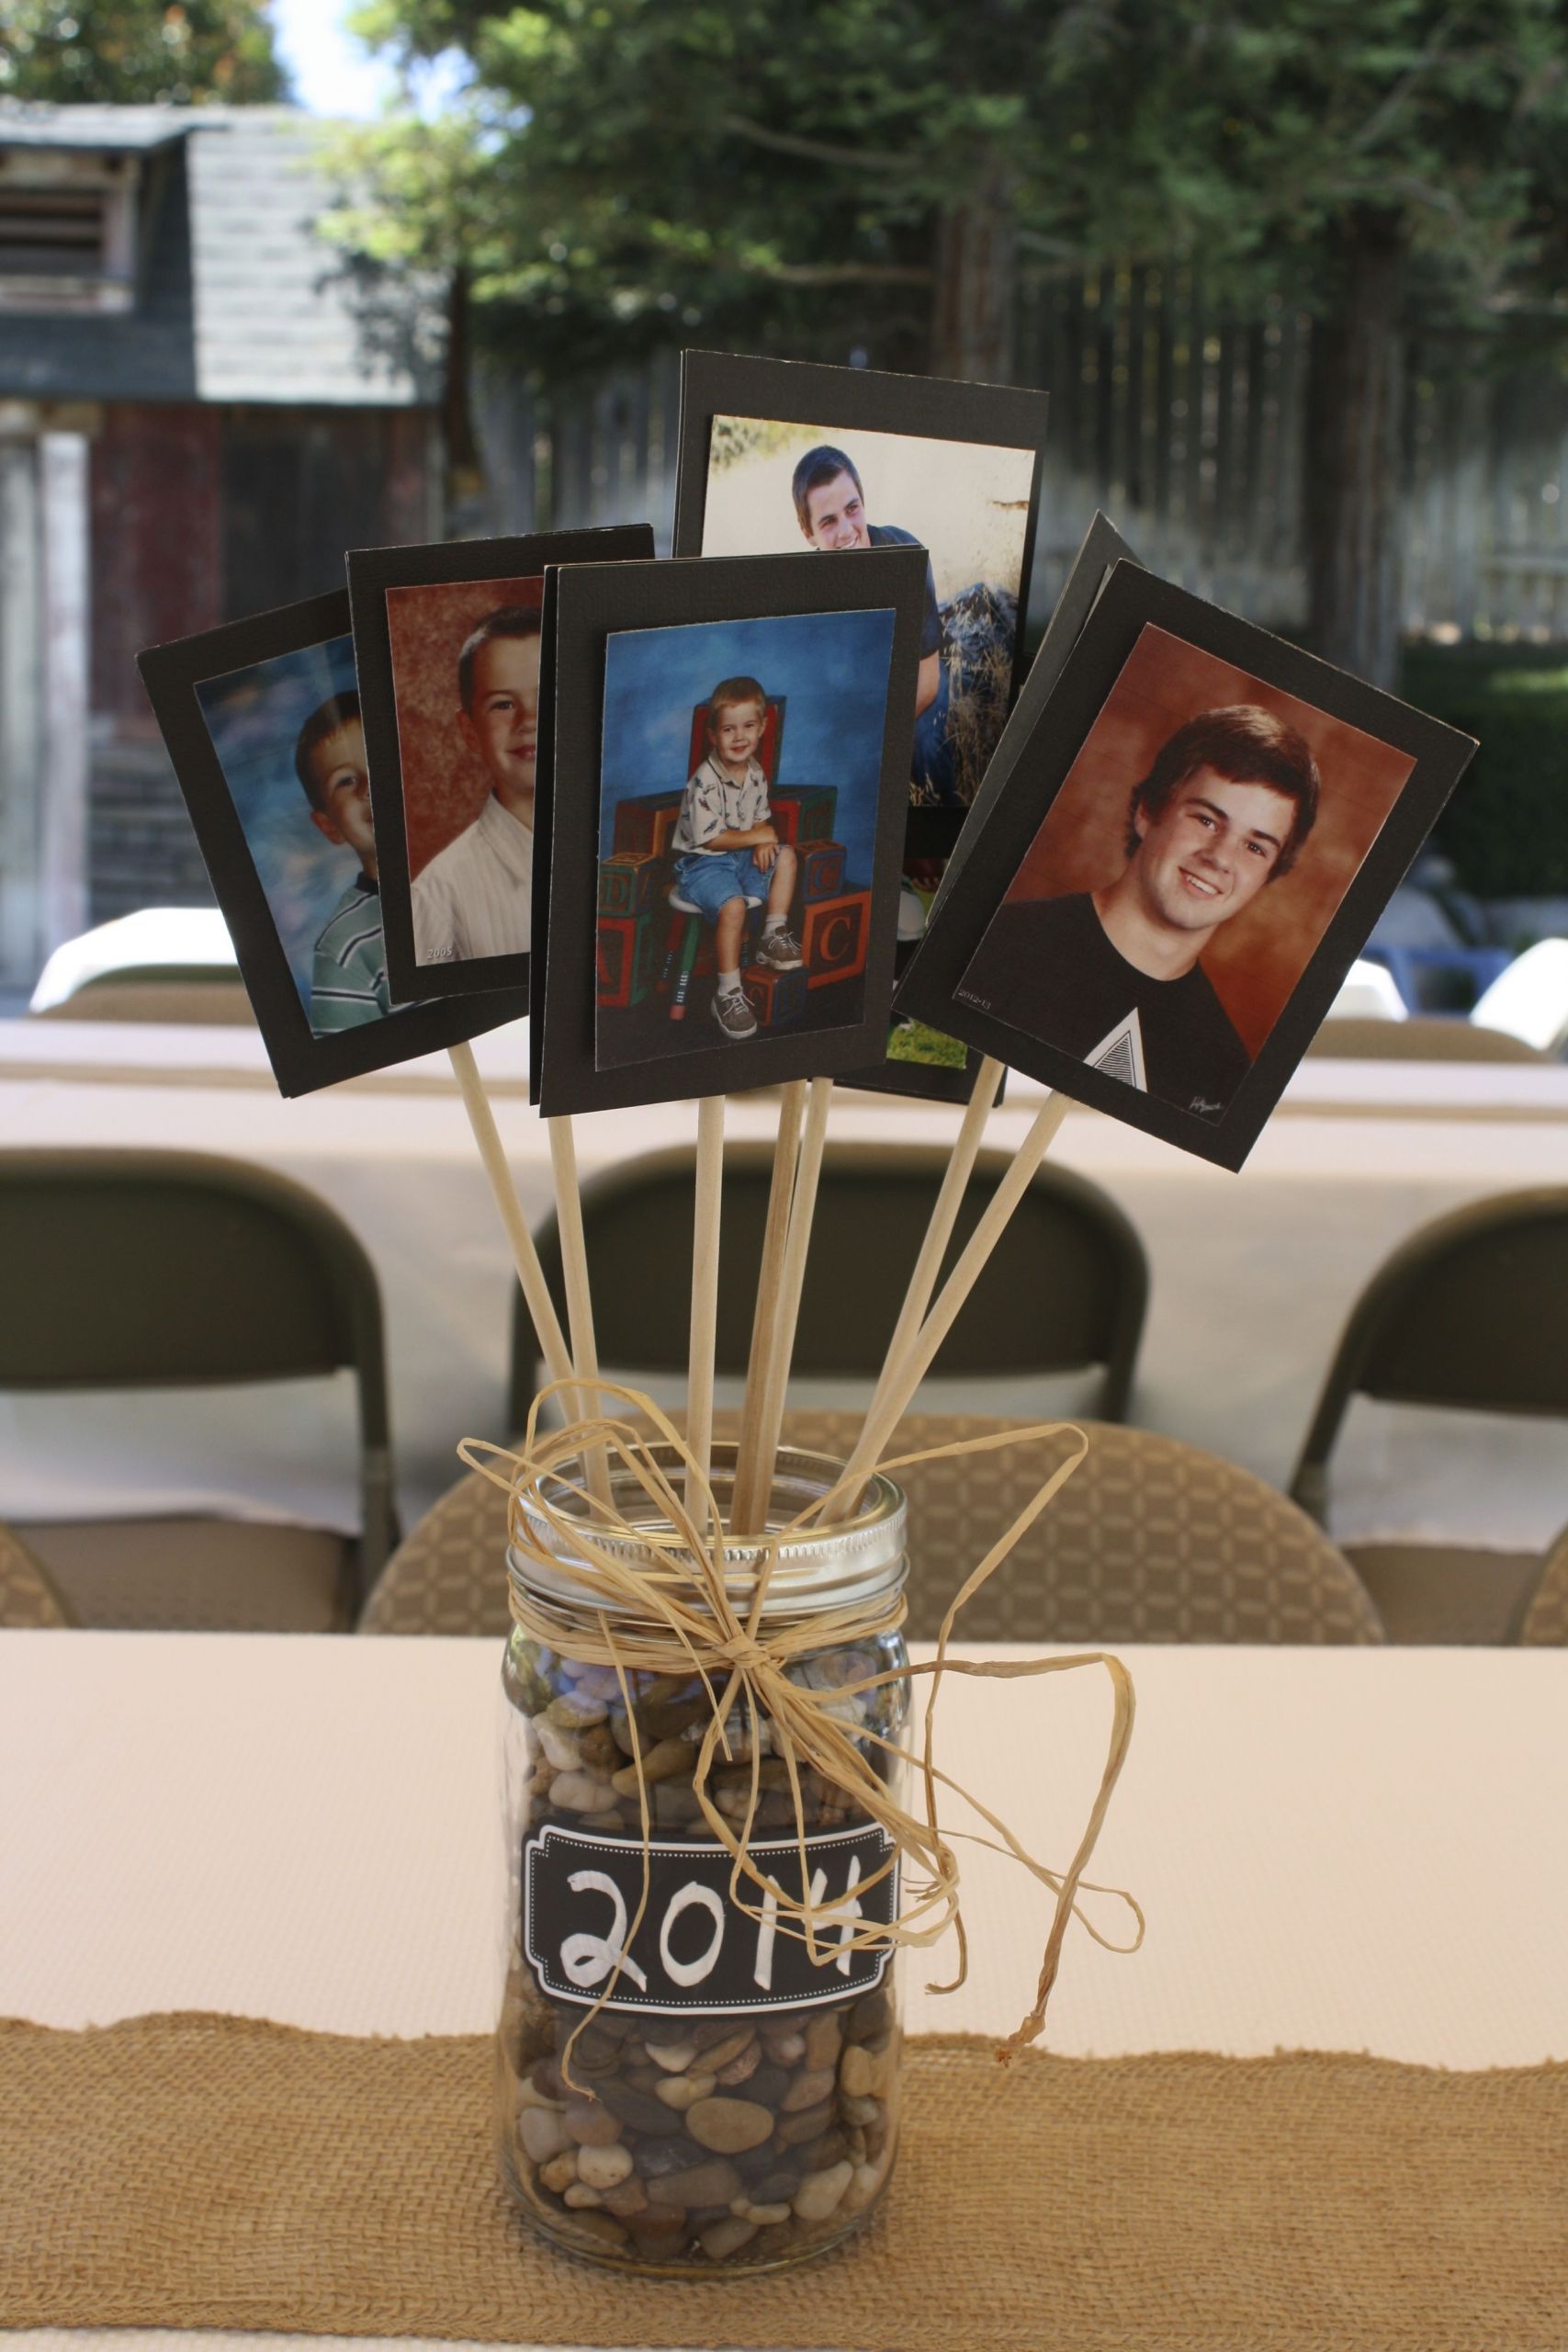 Table Decorations For Graduation Party Ideas
 Centerpiece for tables at a graduation party Good for